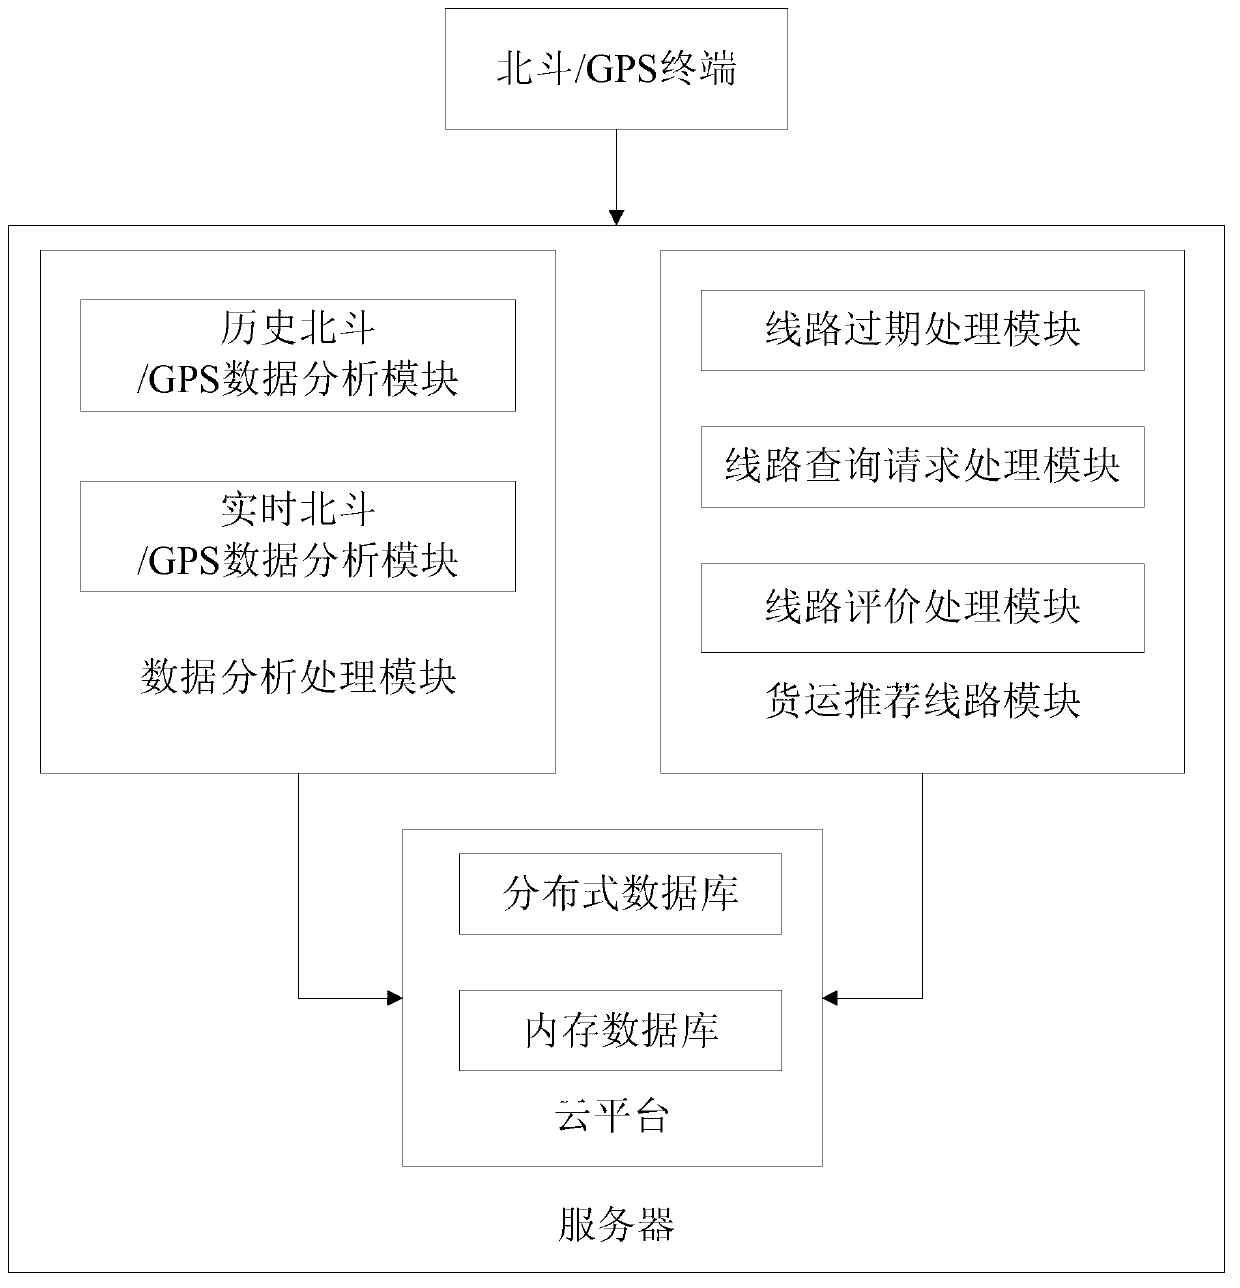 Line recommendation system and method based on Beidou satellite/GPS (global positioning system) data